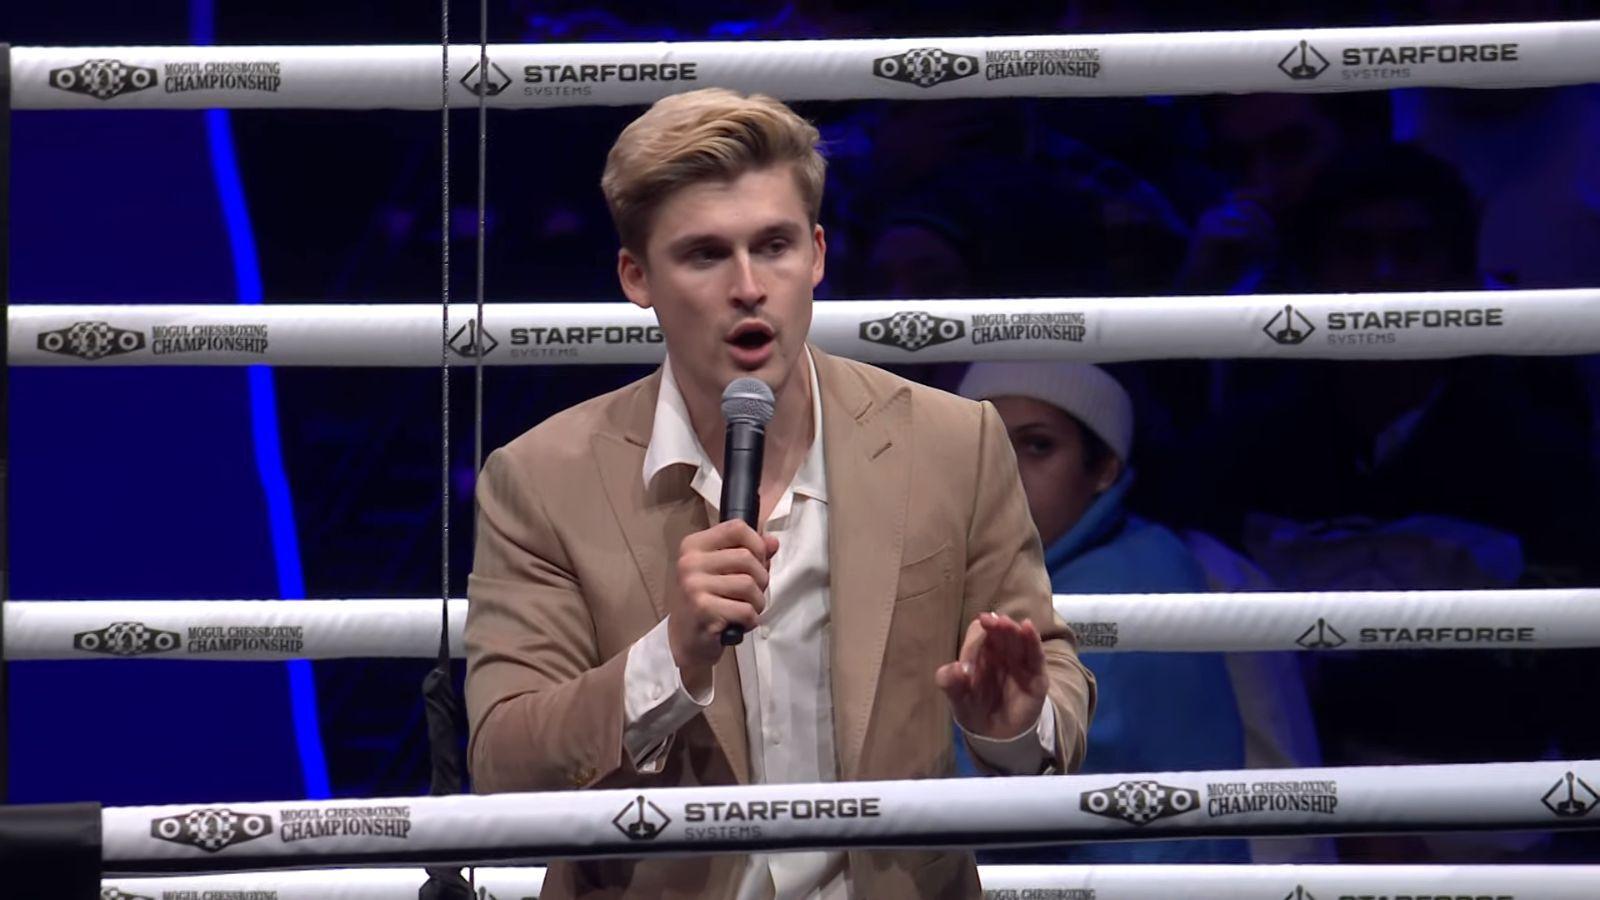 Ludwig at his Chessboxing event